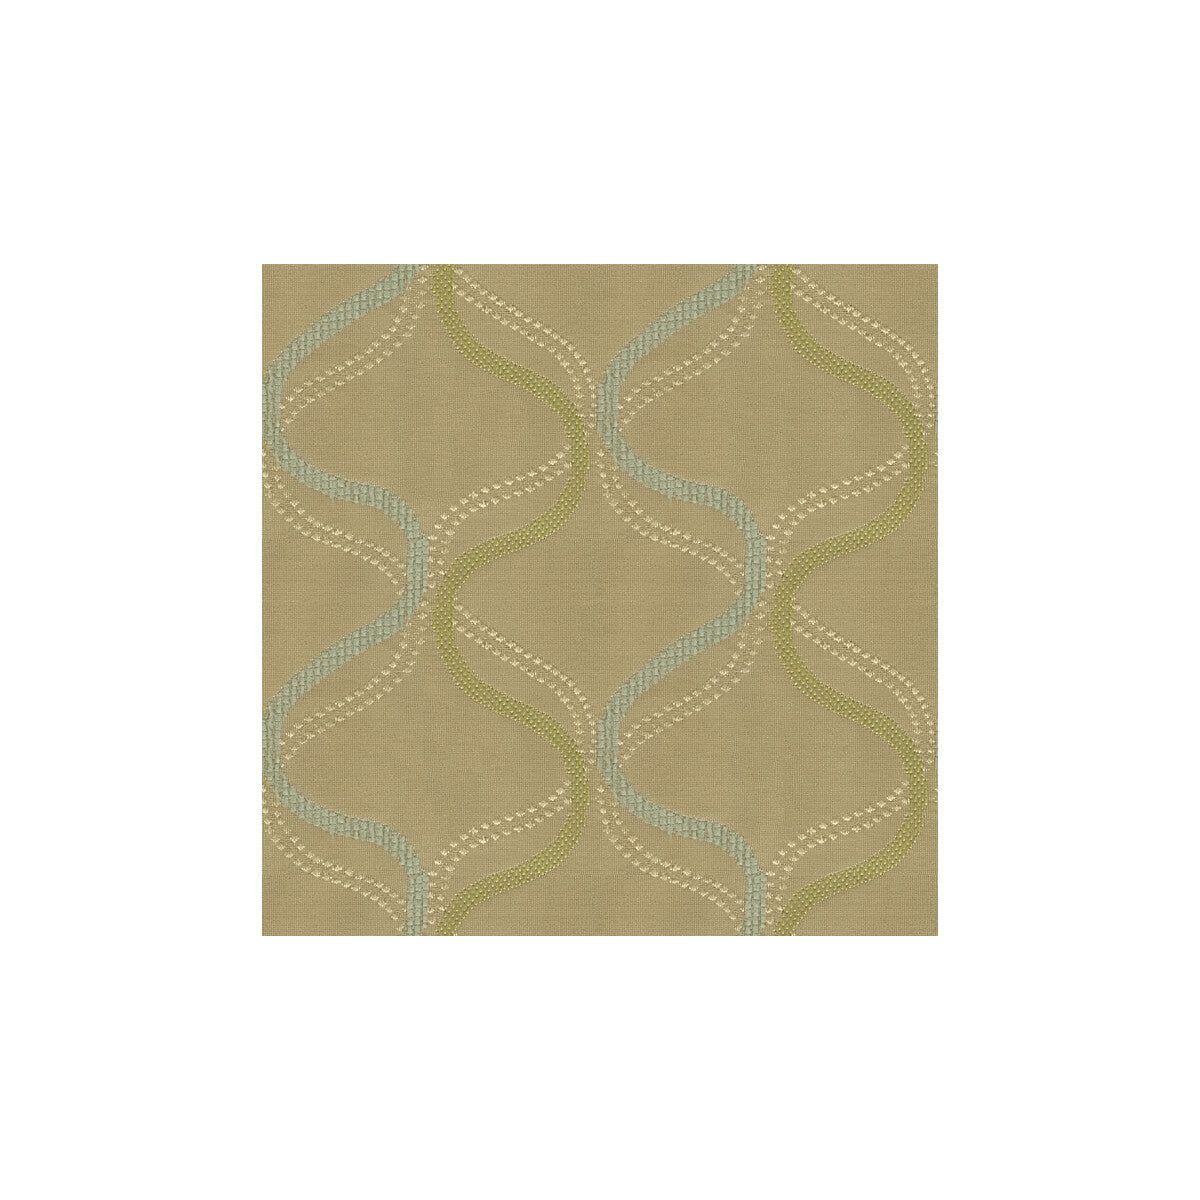 Wishful fabric in opal color - pattern 31548.106.0 - by Kravet Contract in the Contract Gis collection